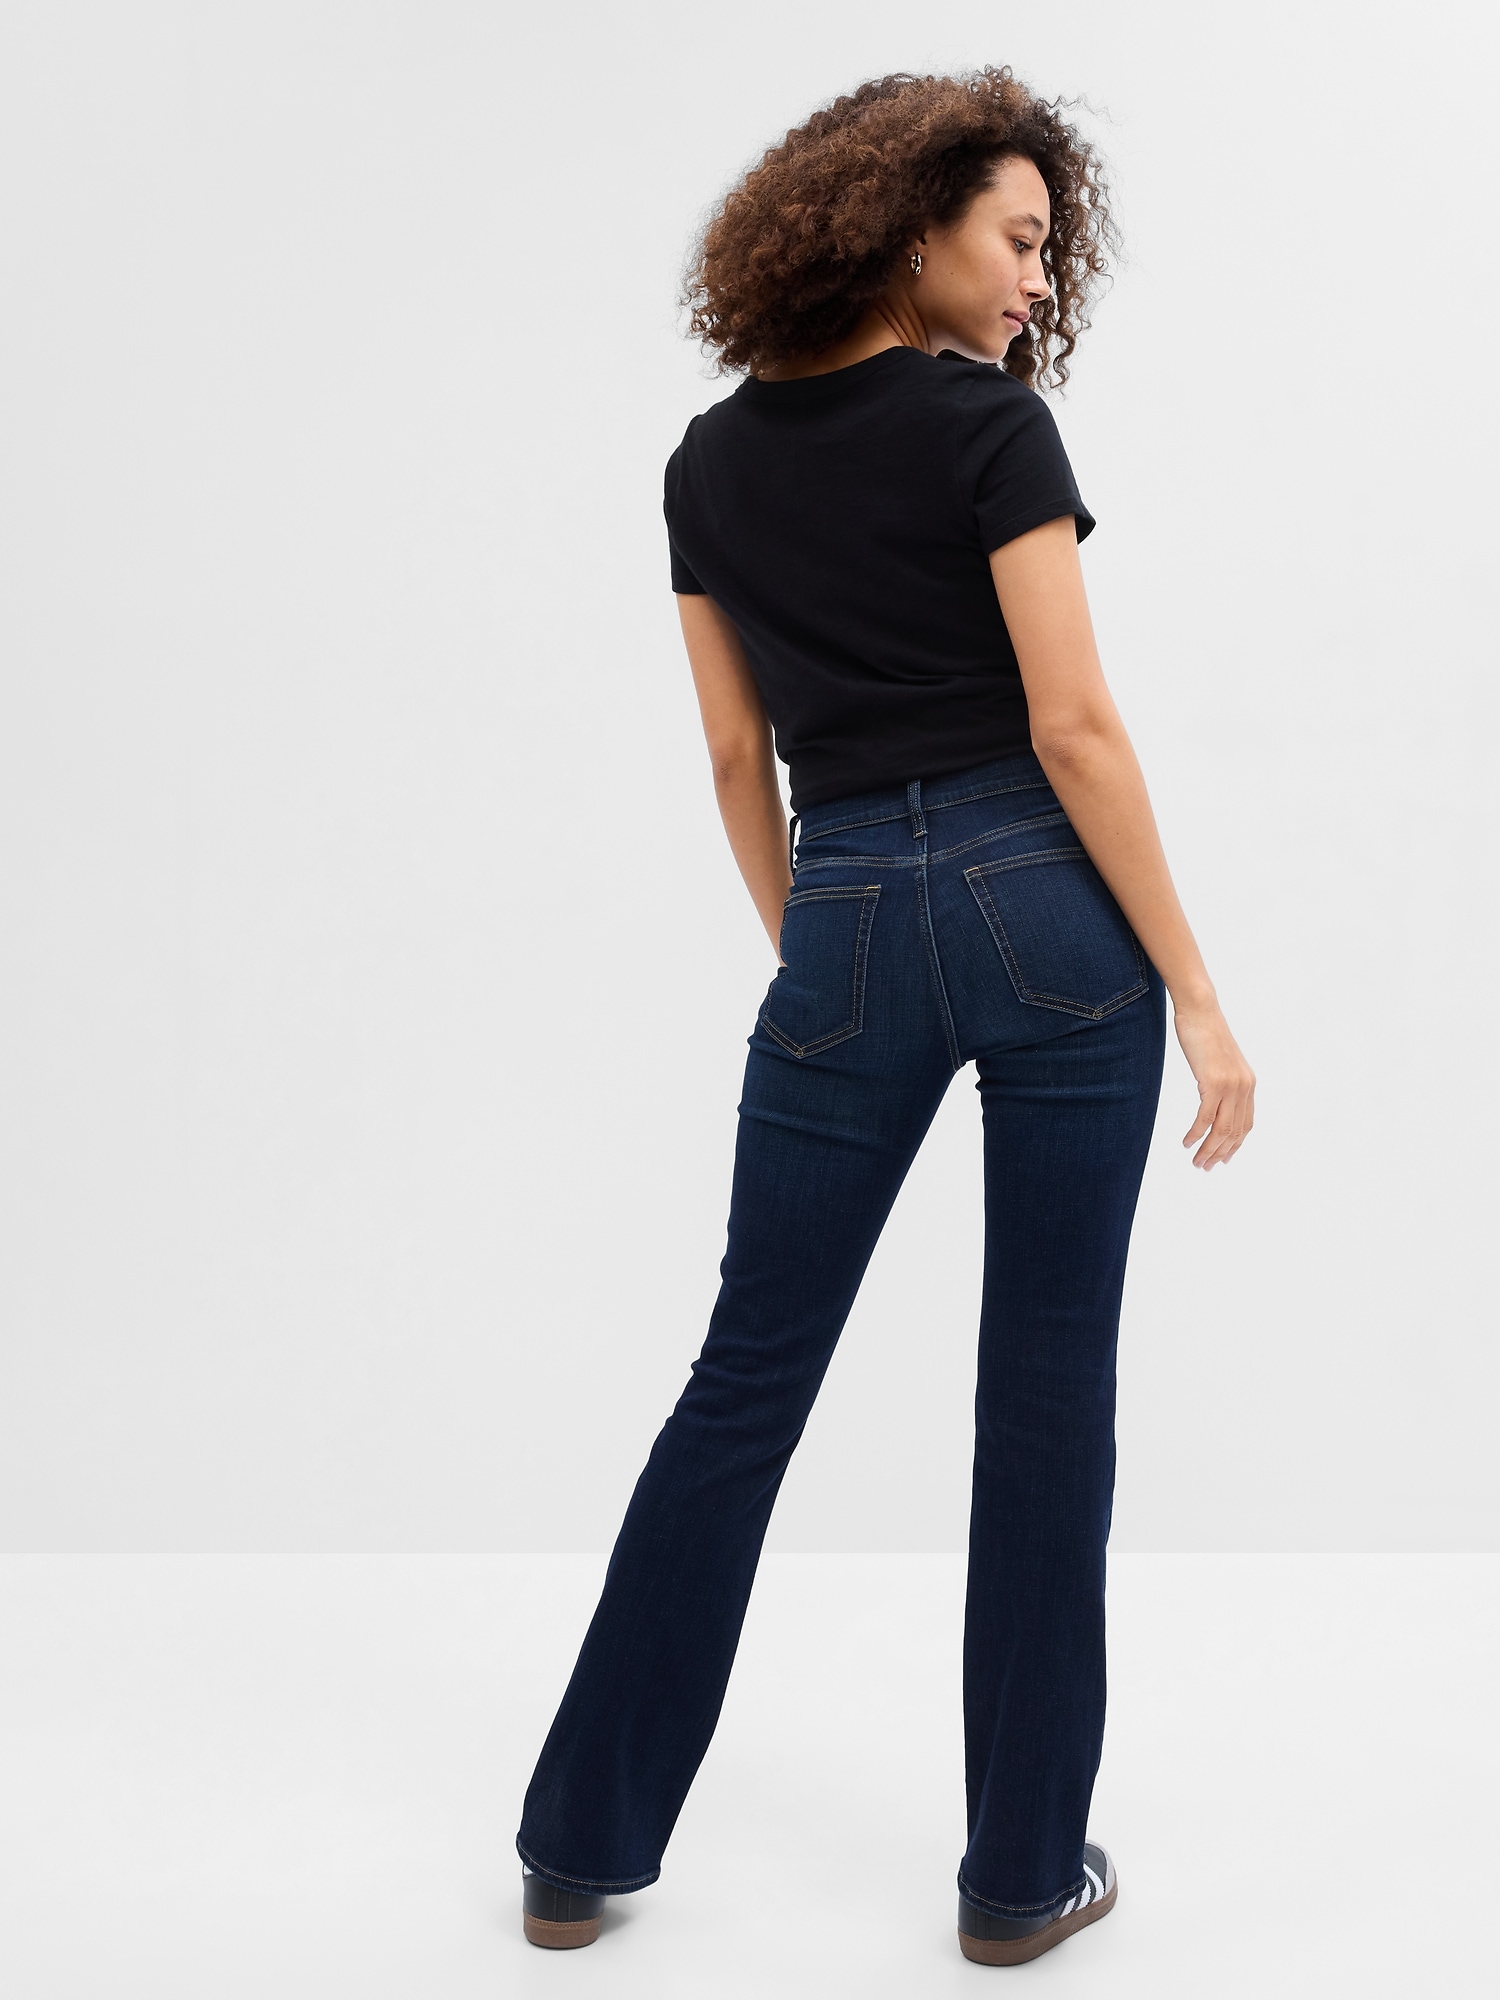 Mid Rise Baby Boot Jeans | Gap Factory